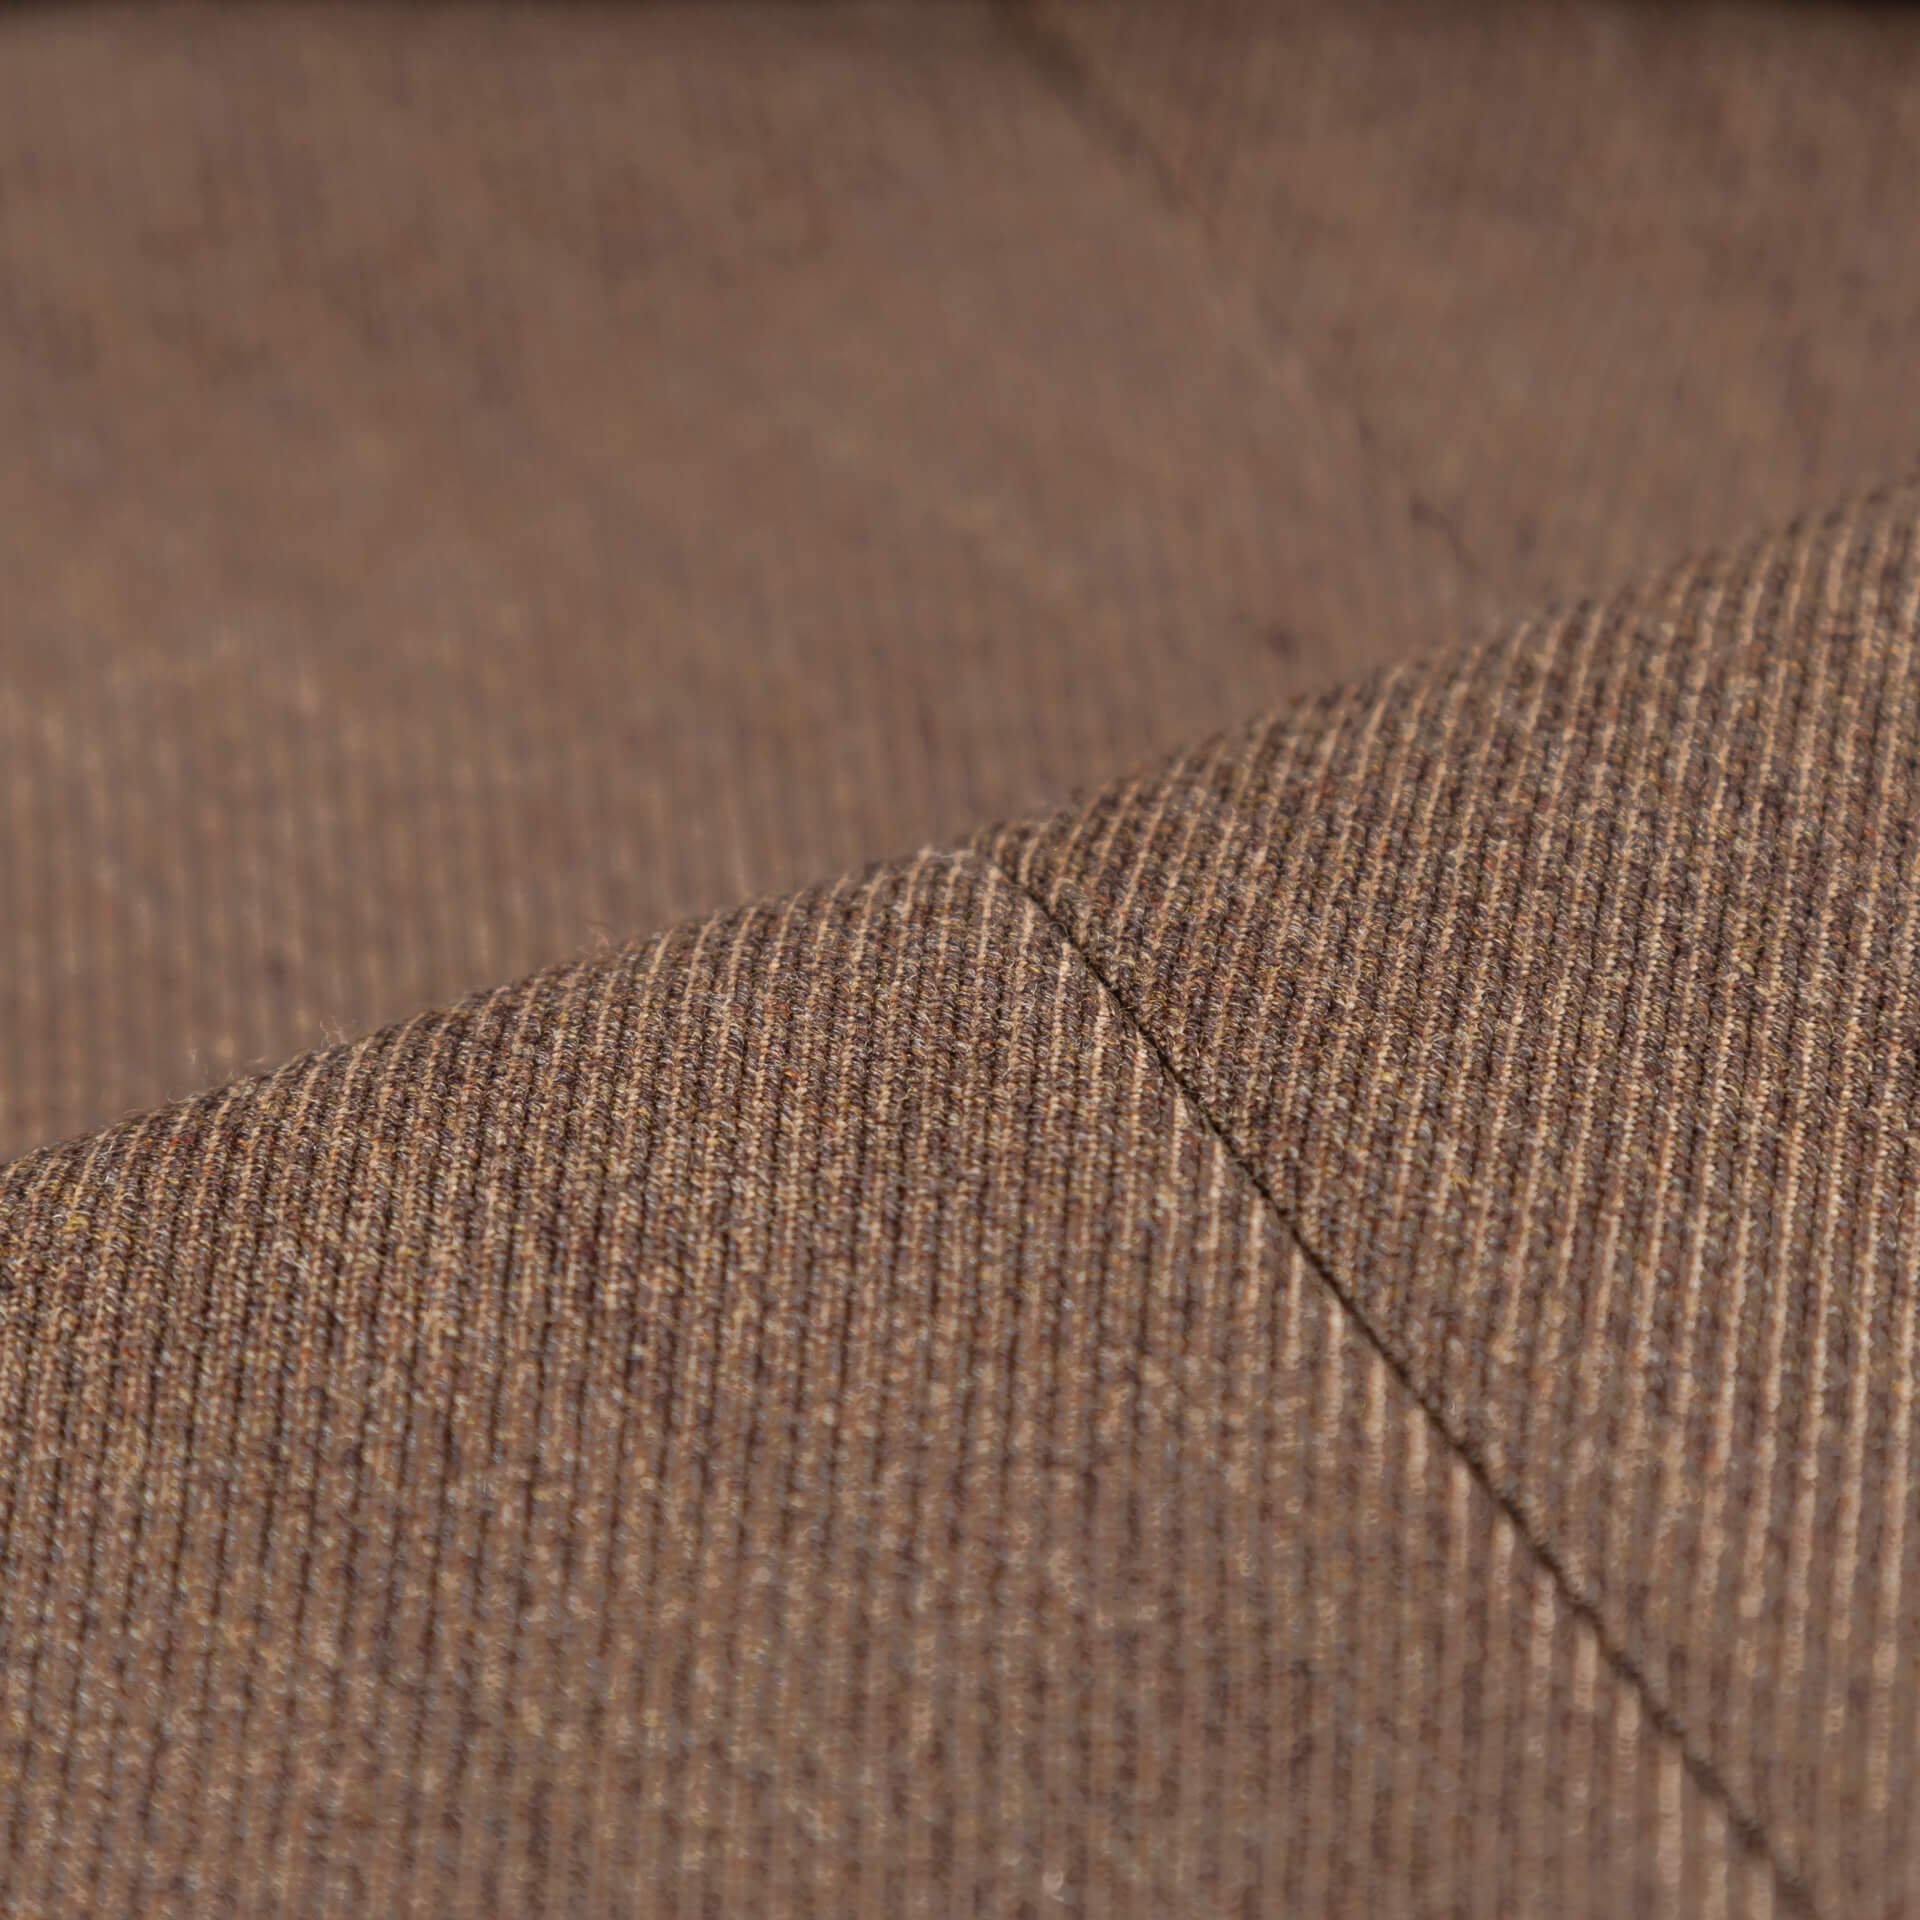   Trousers Biscuit Cavalry Twill Worsted Wool